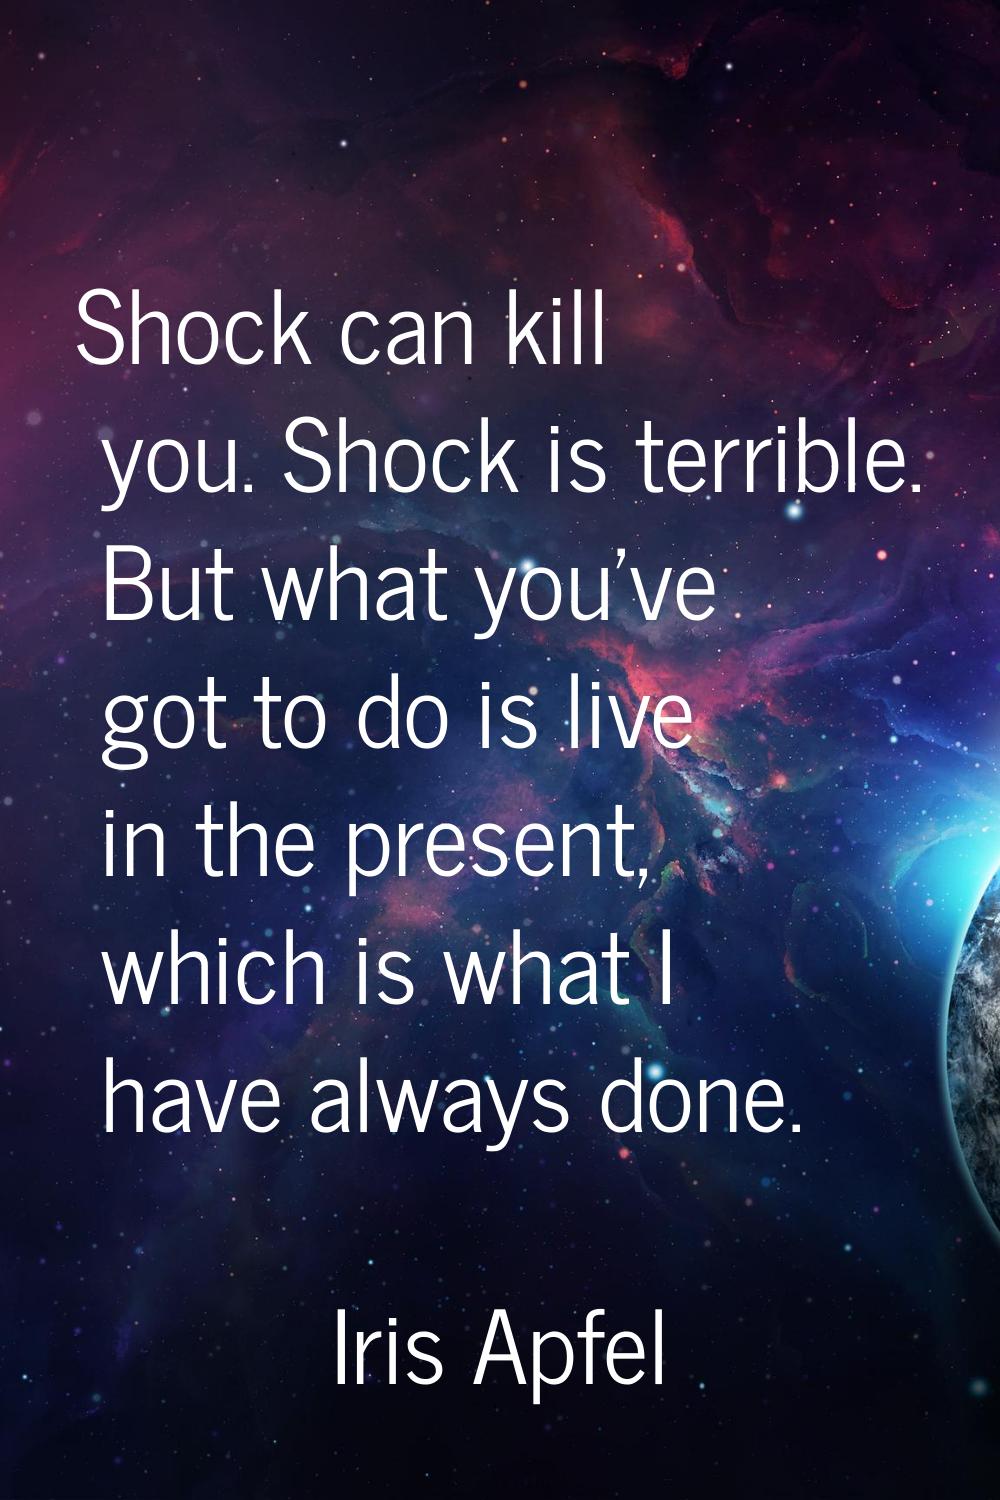 Shock can kill you. Shock is terrible. But what you've got to do is live in the present, which is w